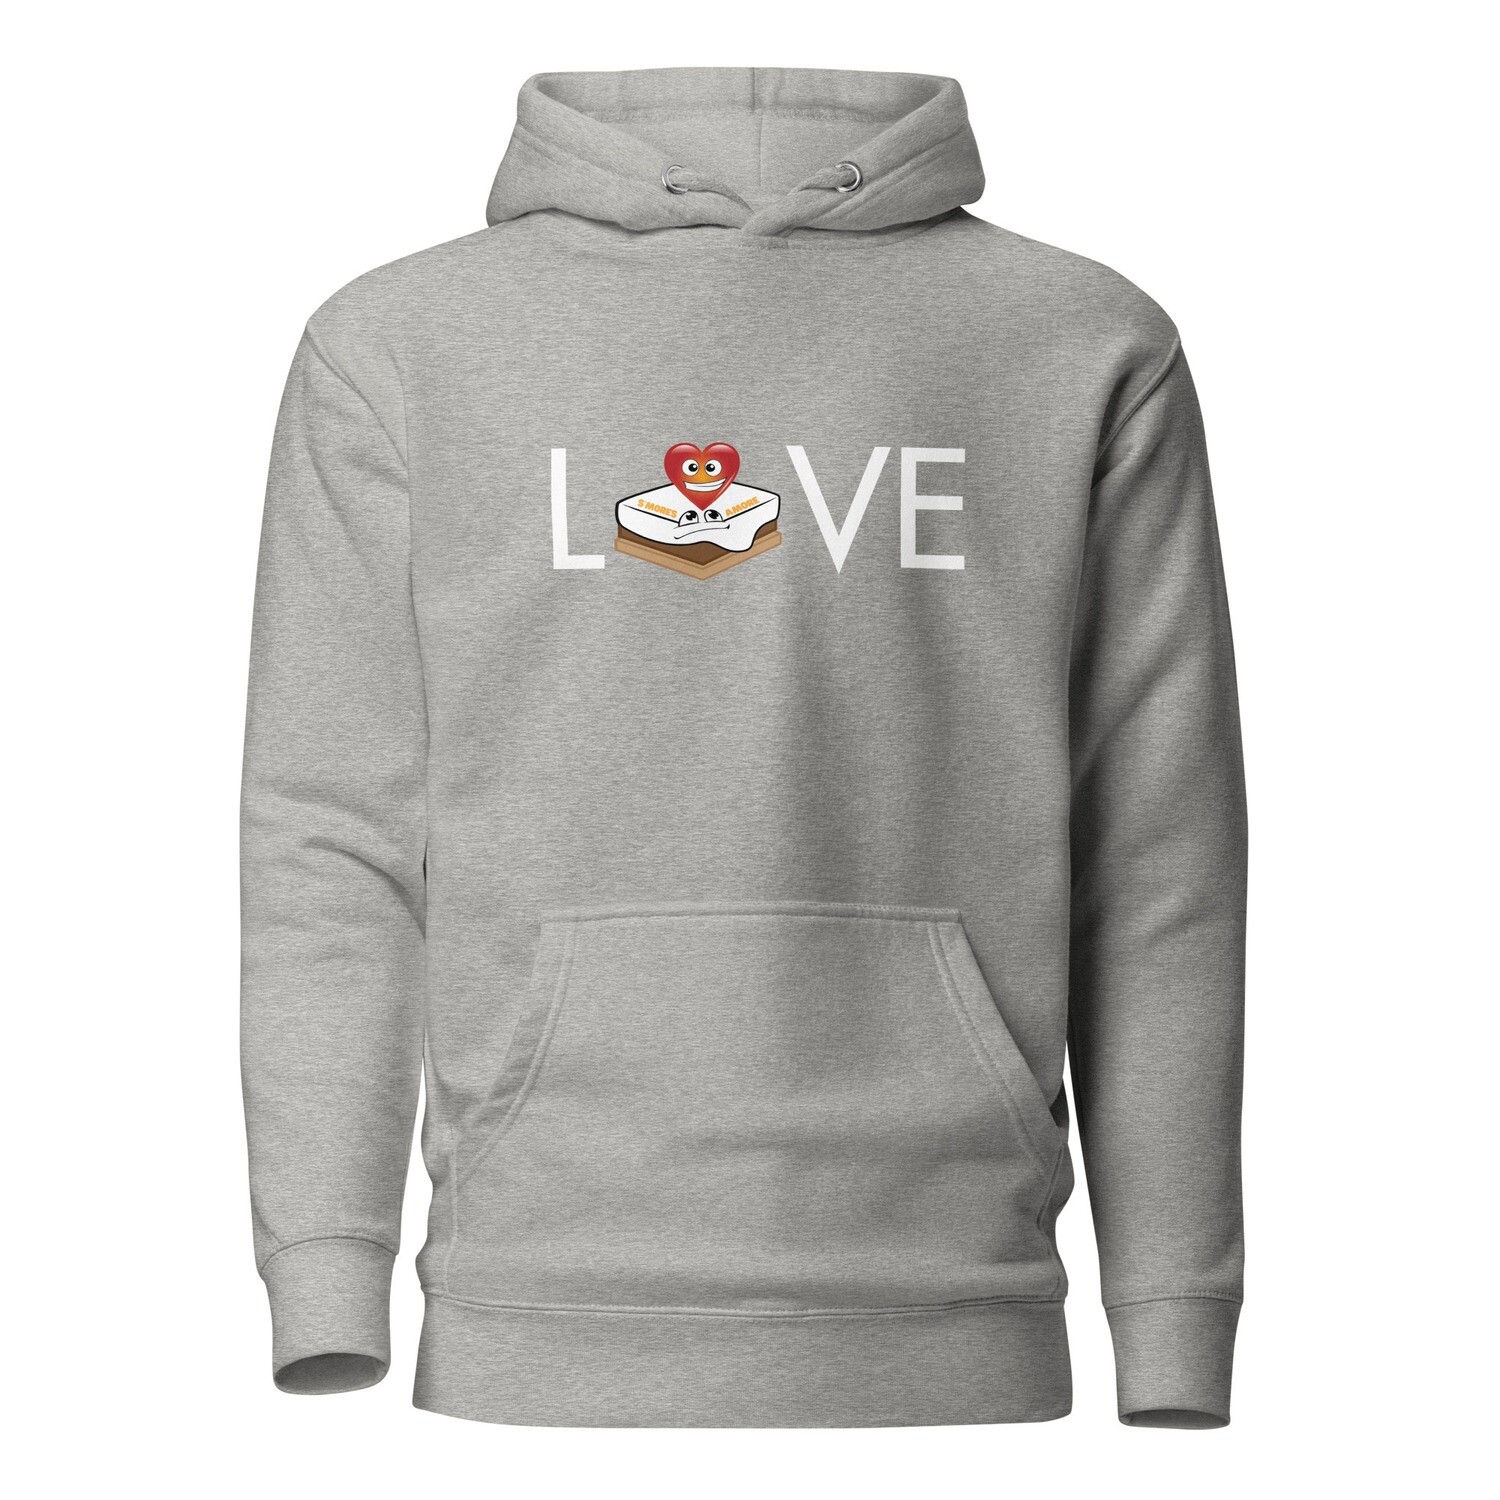 S'mores Amore "LOVE" Hoodie